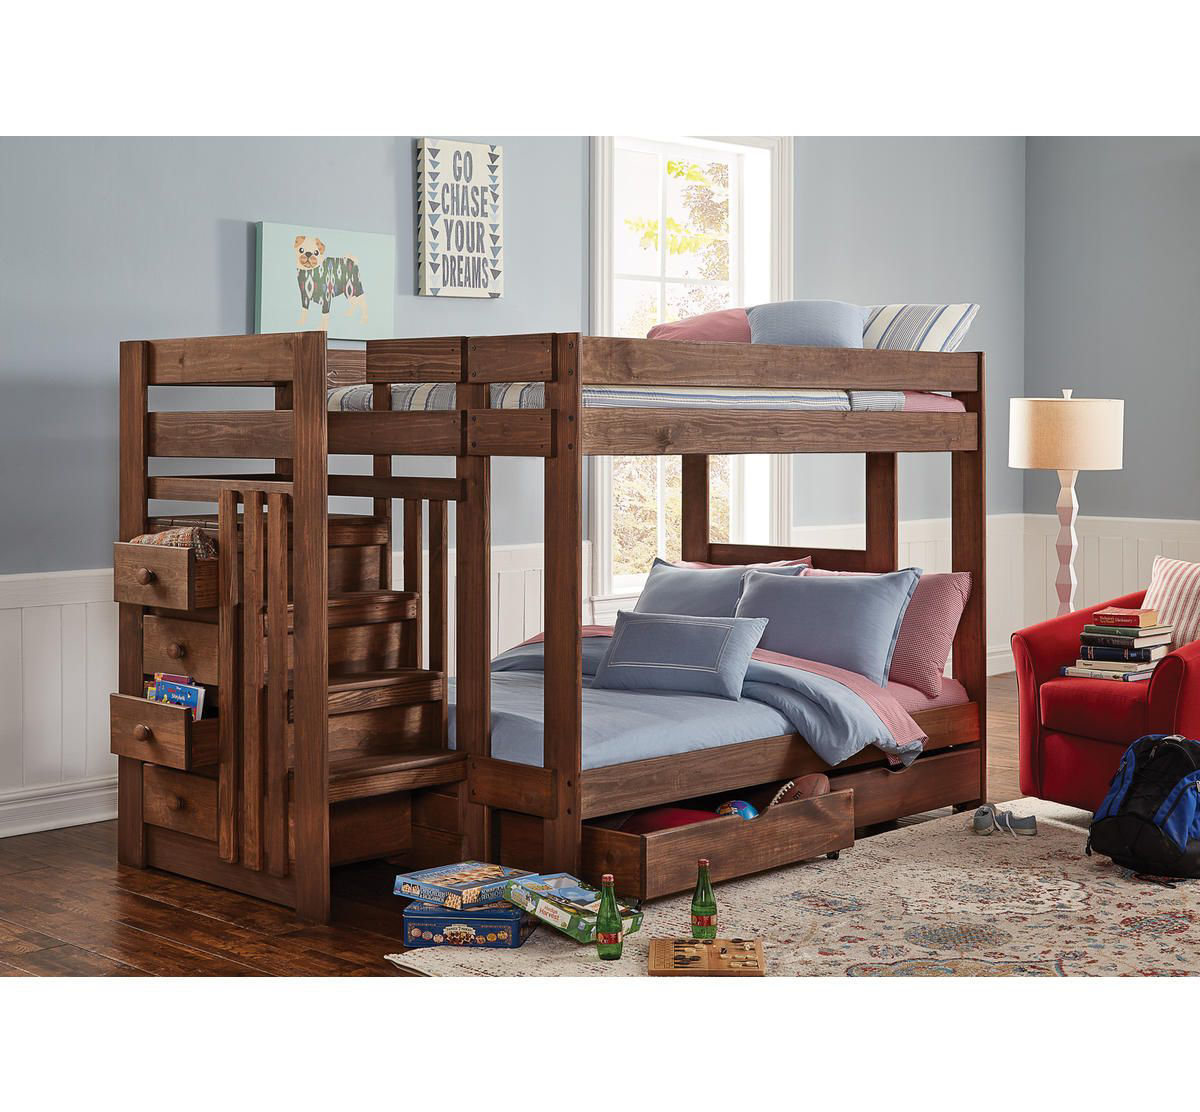 Baylee Full Stairbed Bad Home, Full Over Full Bunk Bed Mattress